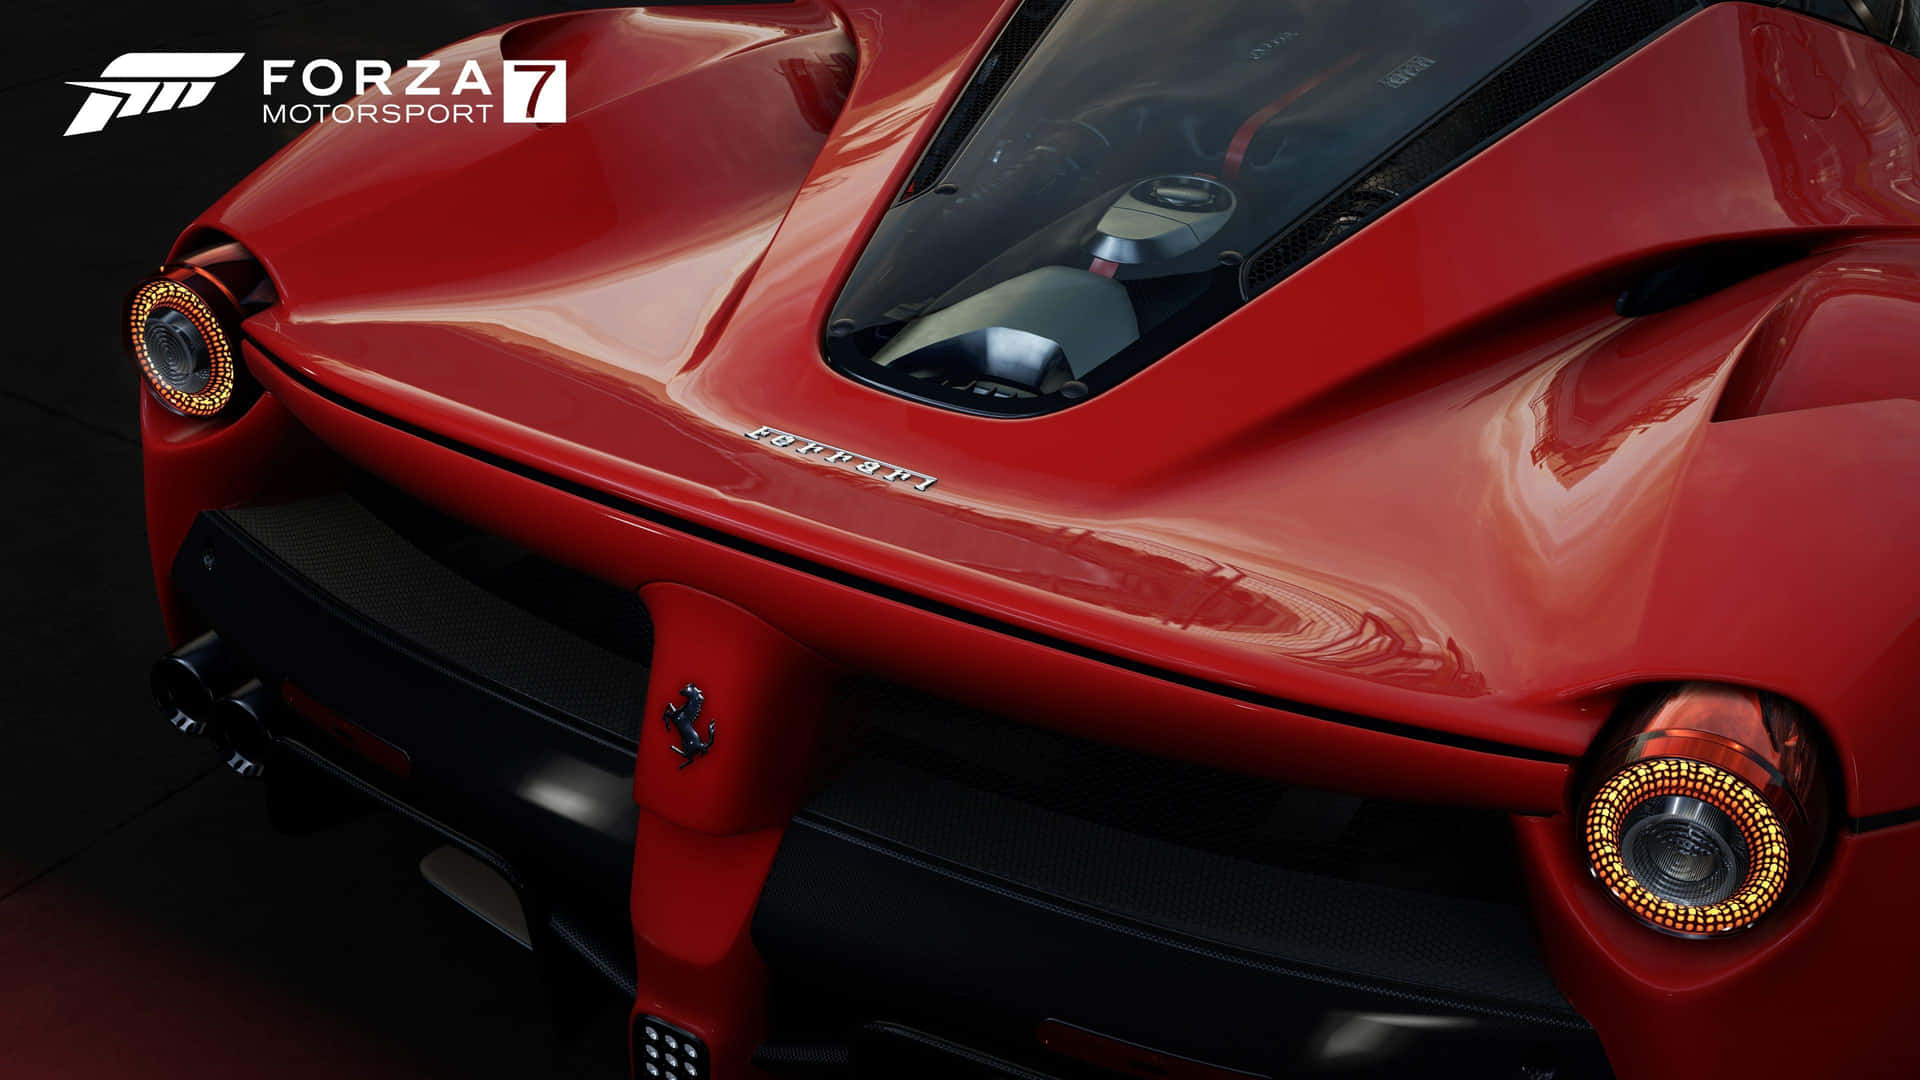 "Step Inside Forza Motorsport 7 and Take the Wheel."